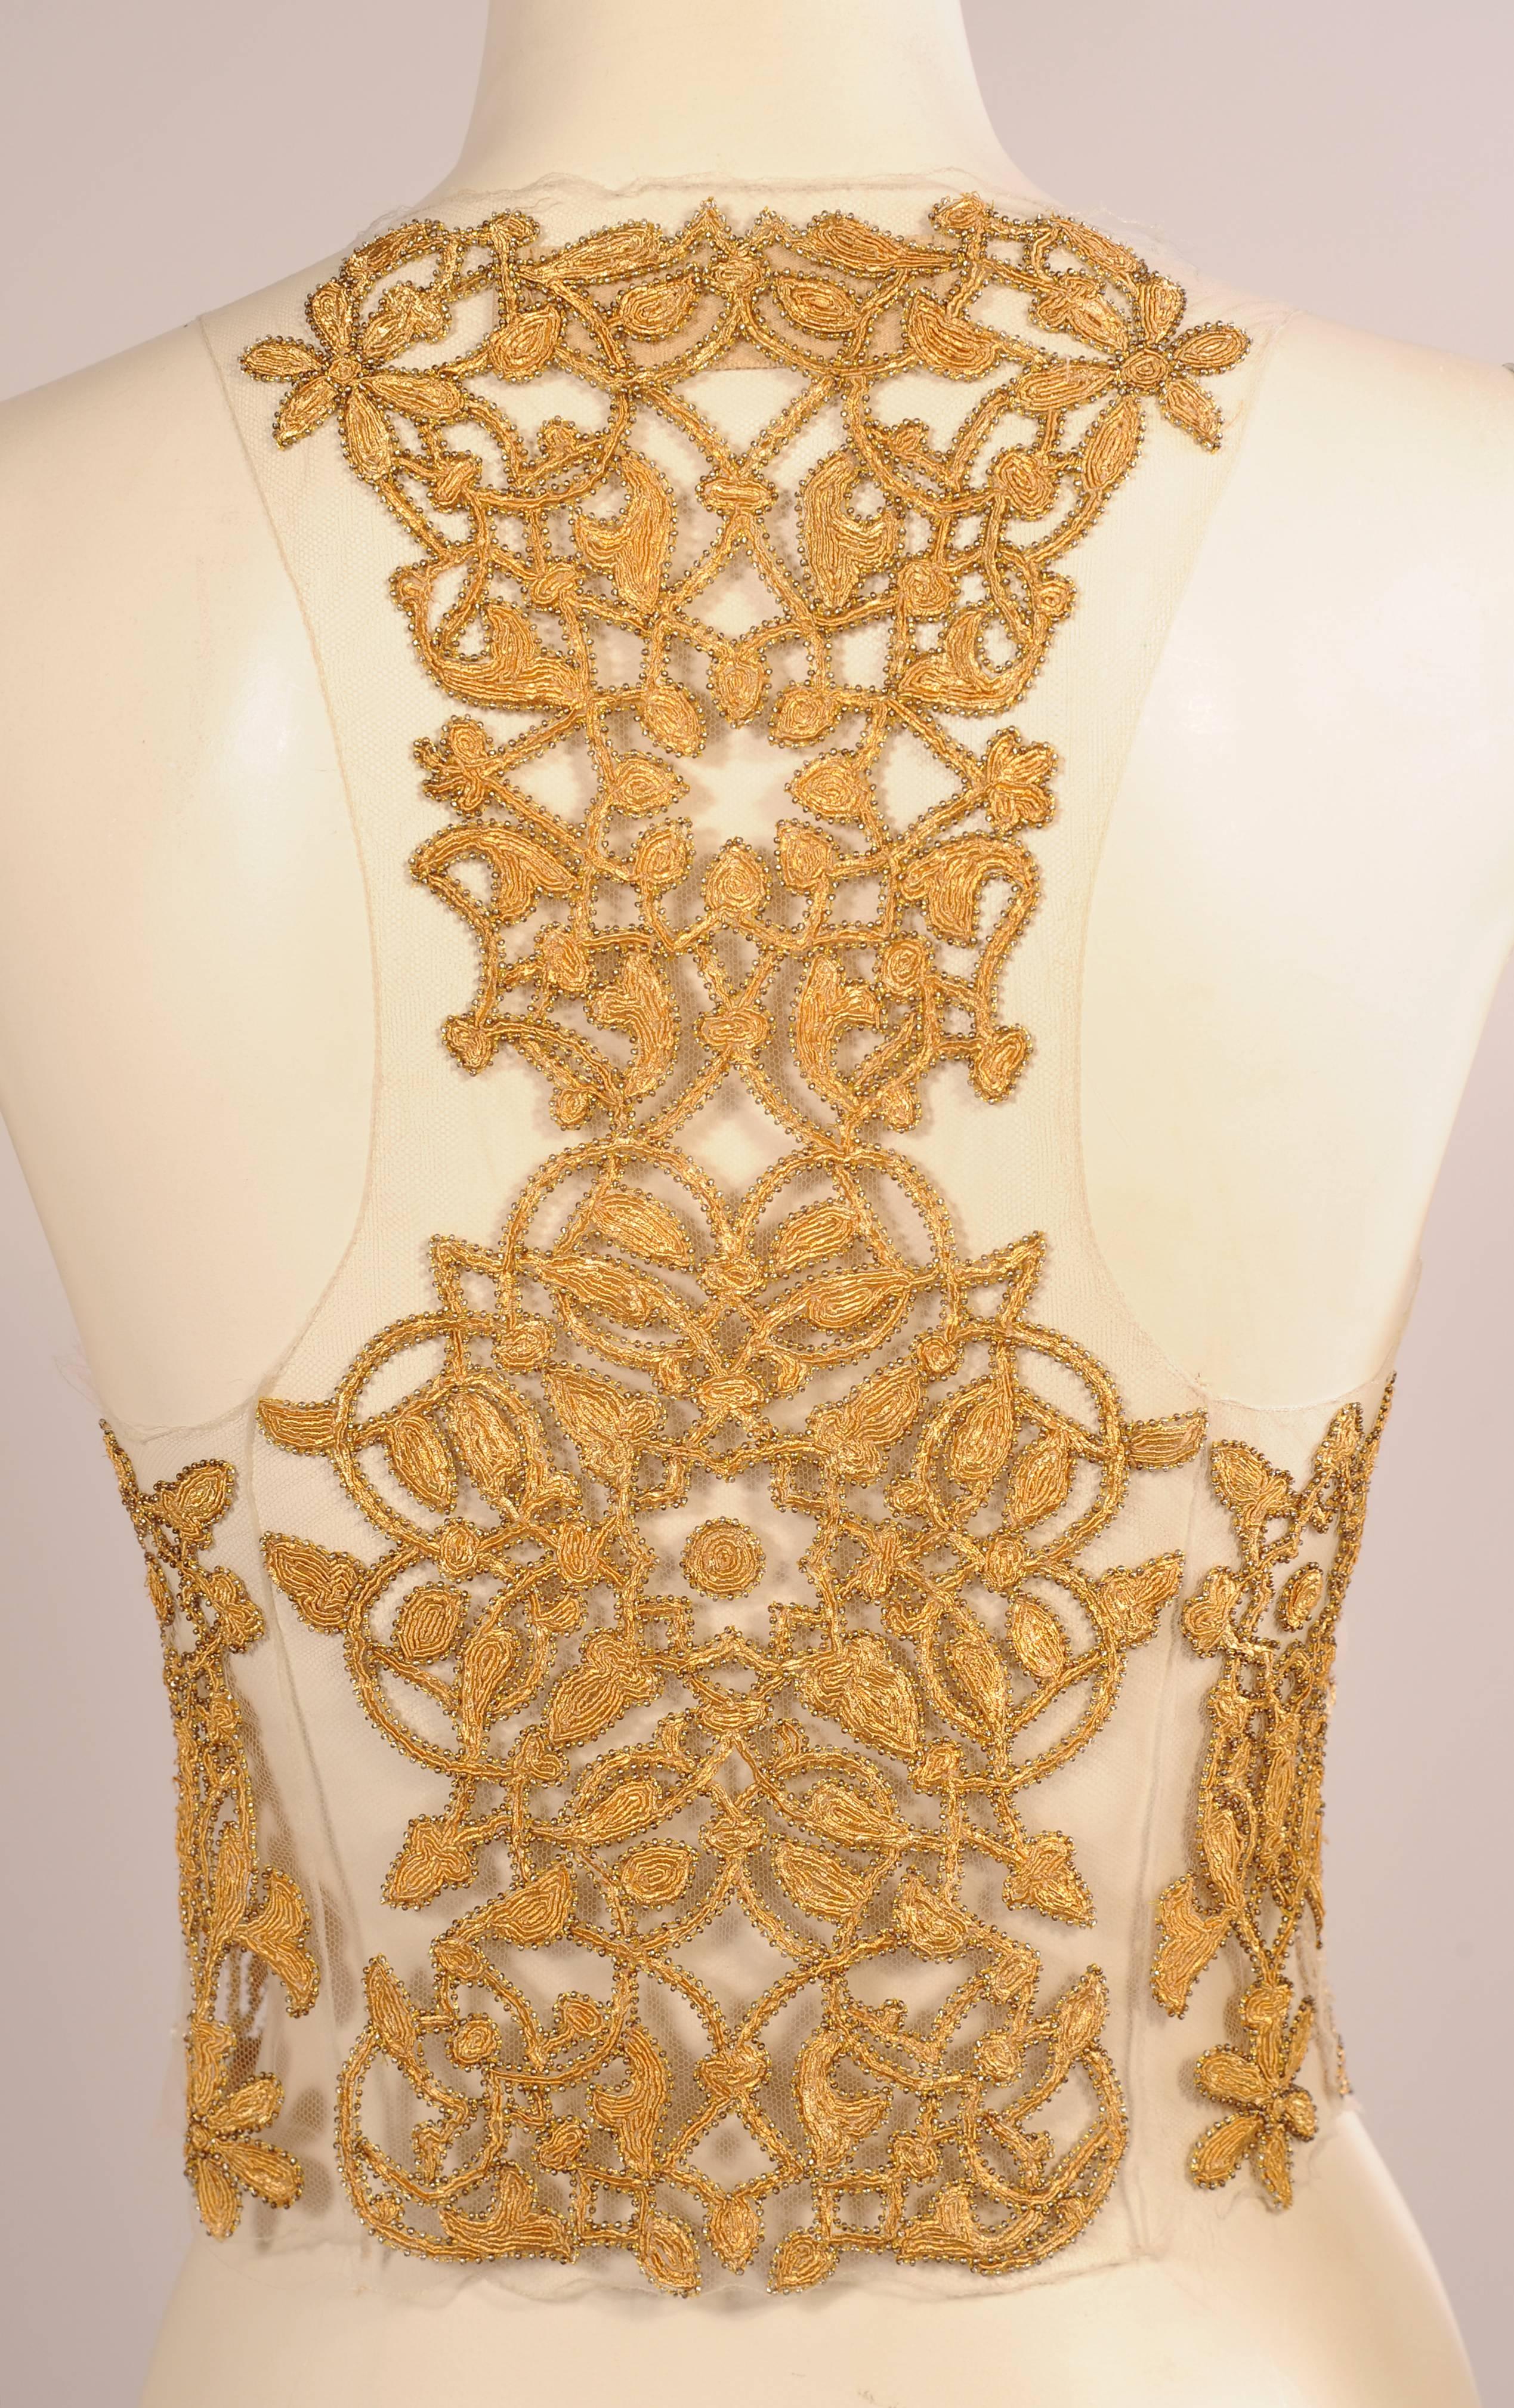 gold bodice top